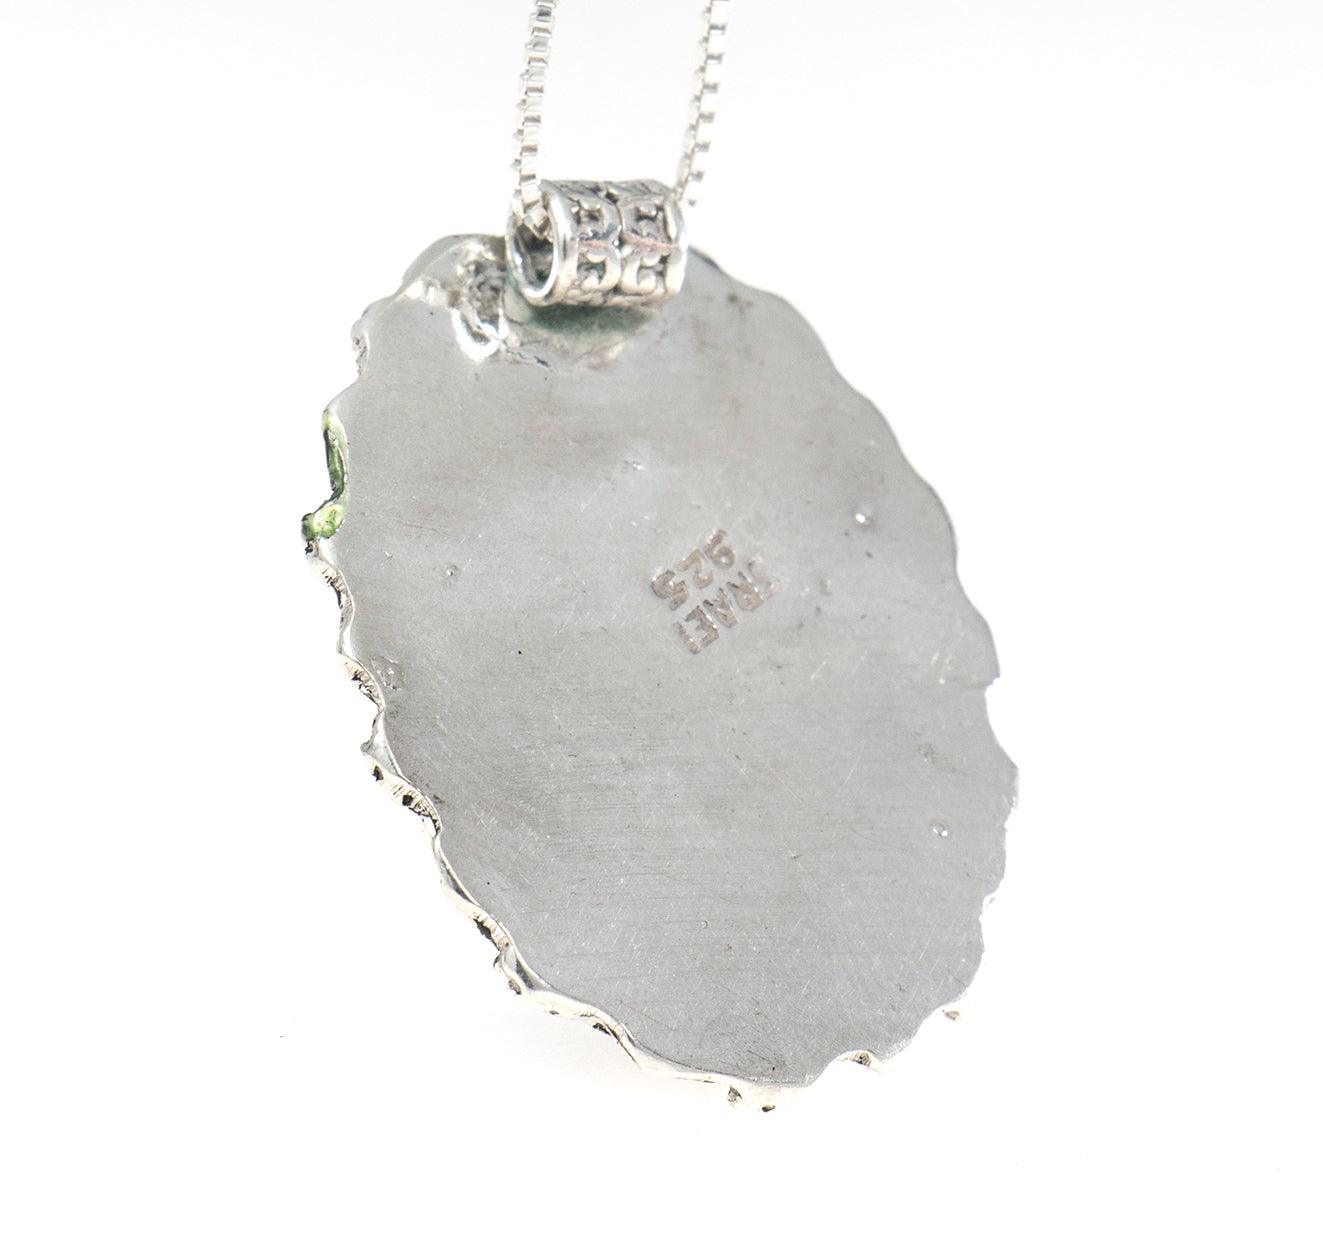 Eilat Stone Pendant in 925 Sterling Silver + Necklace #7 - Spring Nahal